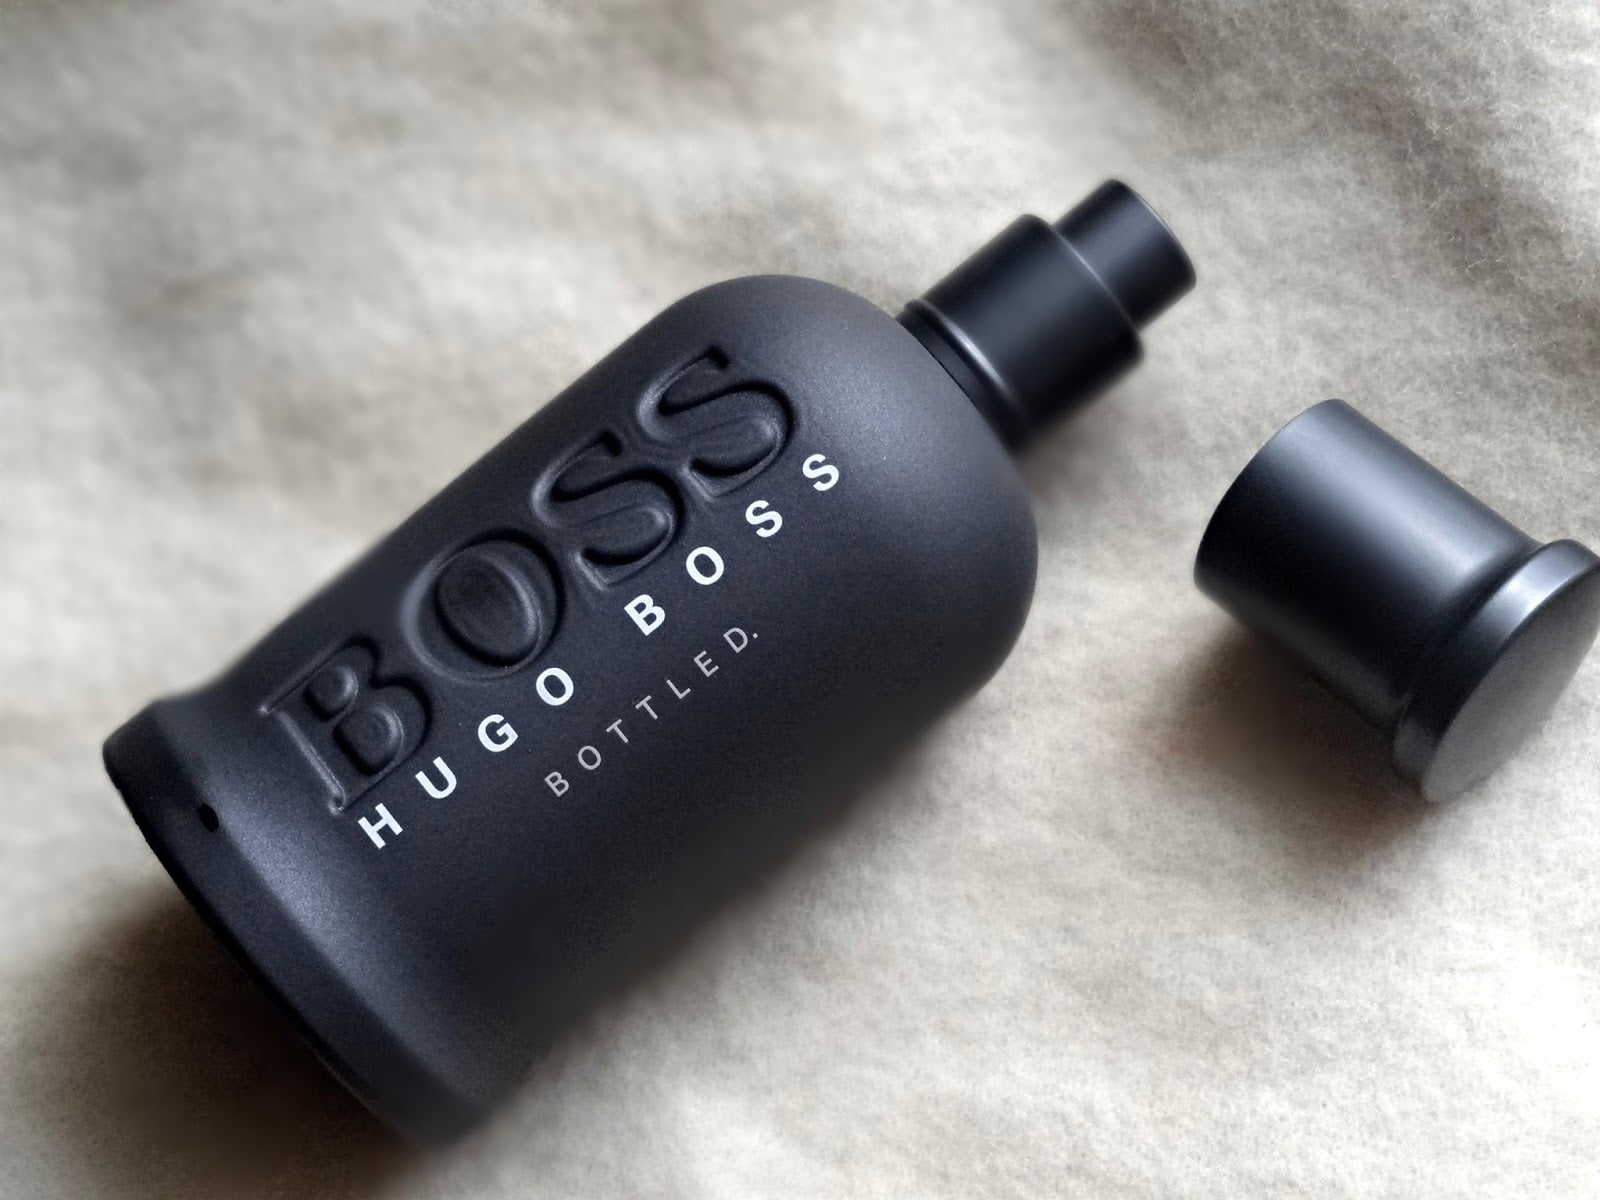 Hugo Boss Bottled Collector's Edition EDT - Perfume Planet 